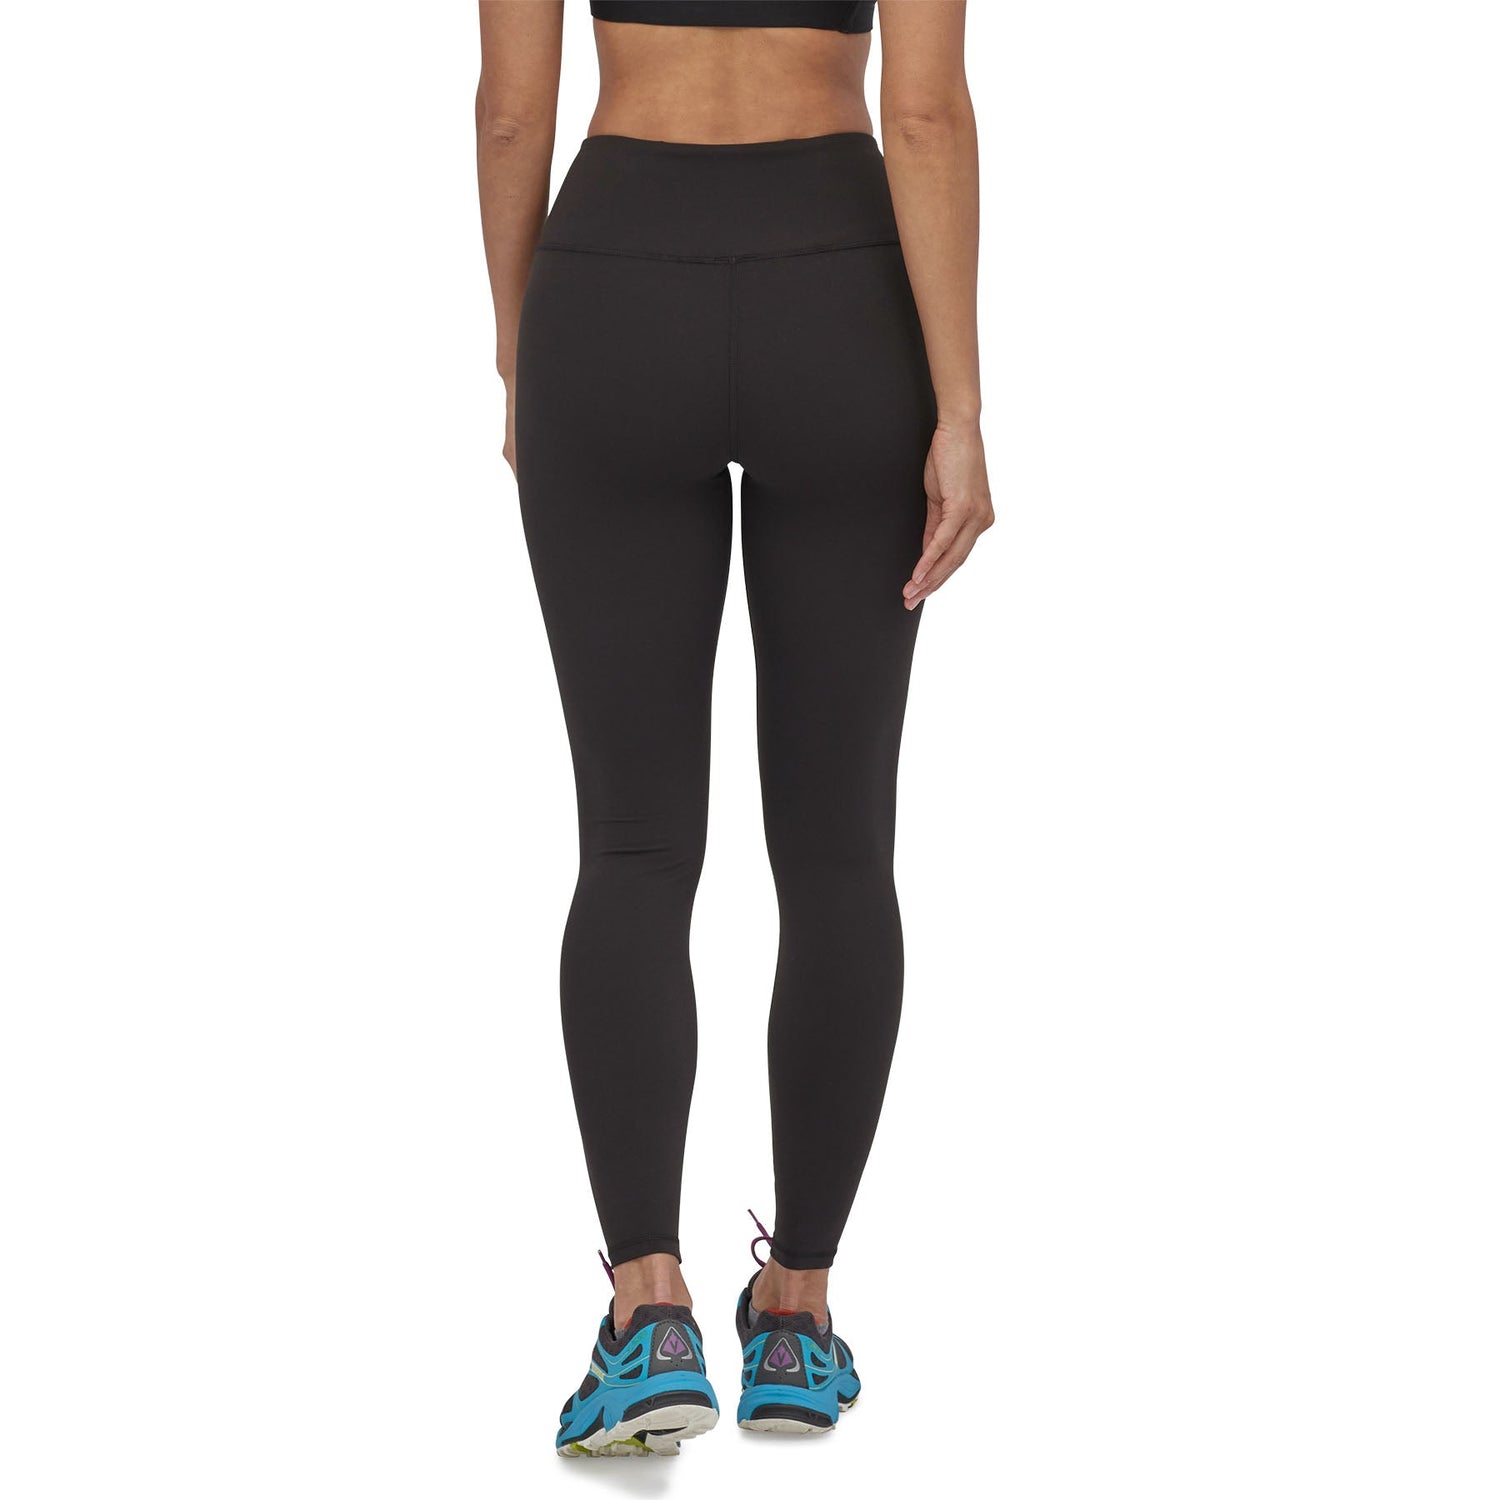 Patagonia - W's Maipo 7/8 Tights - Recycled nylon - Weekendbee - sustainable sportswear